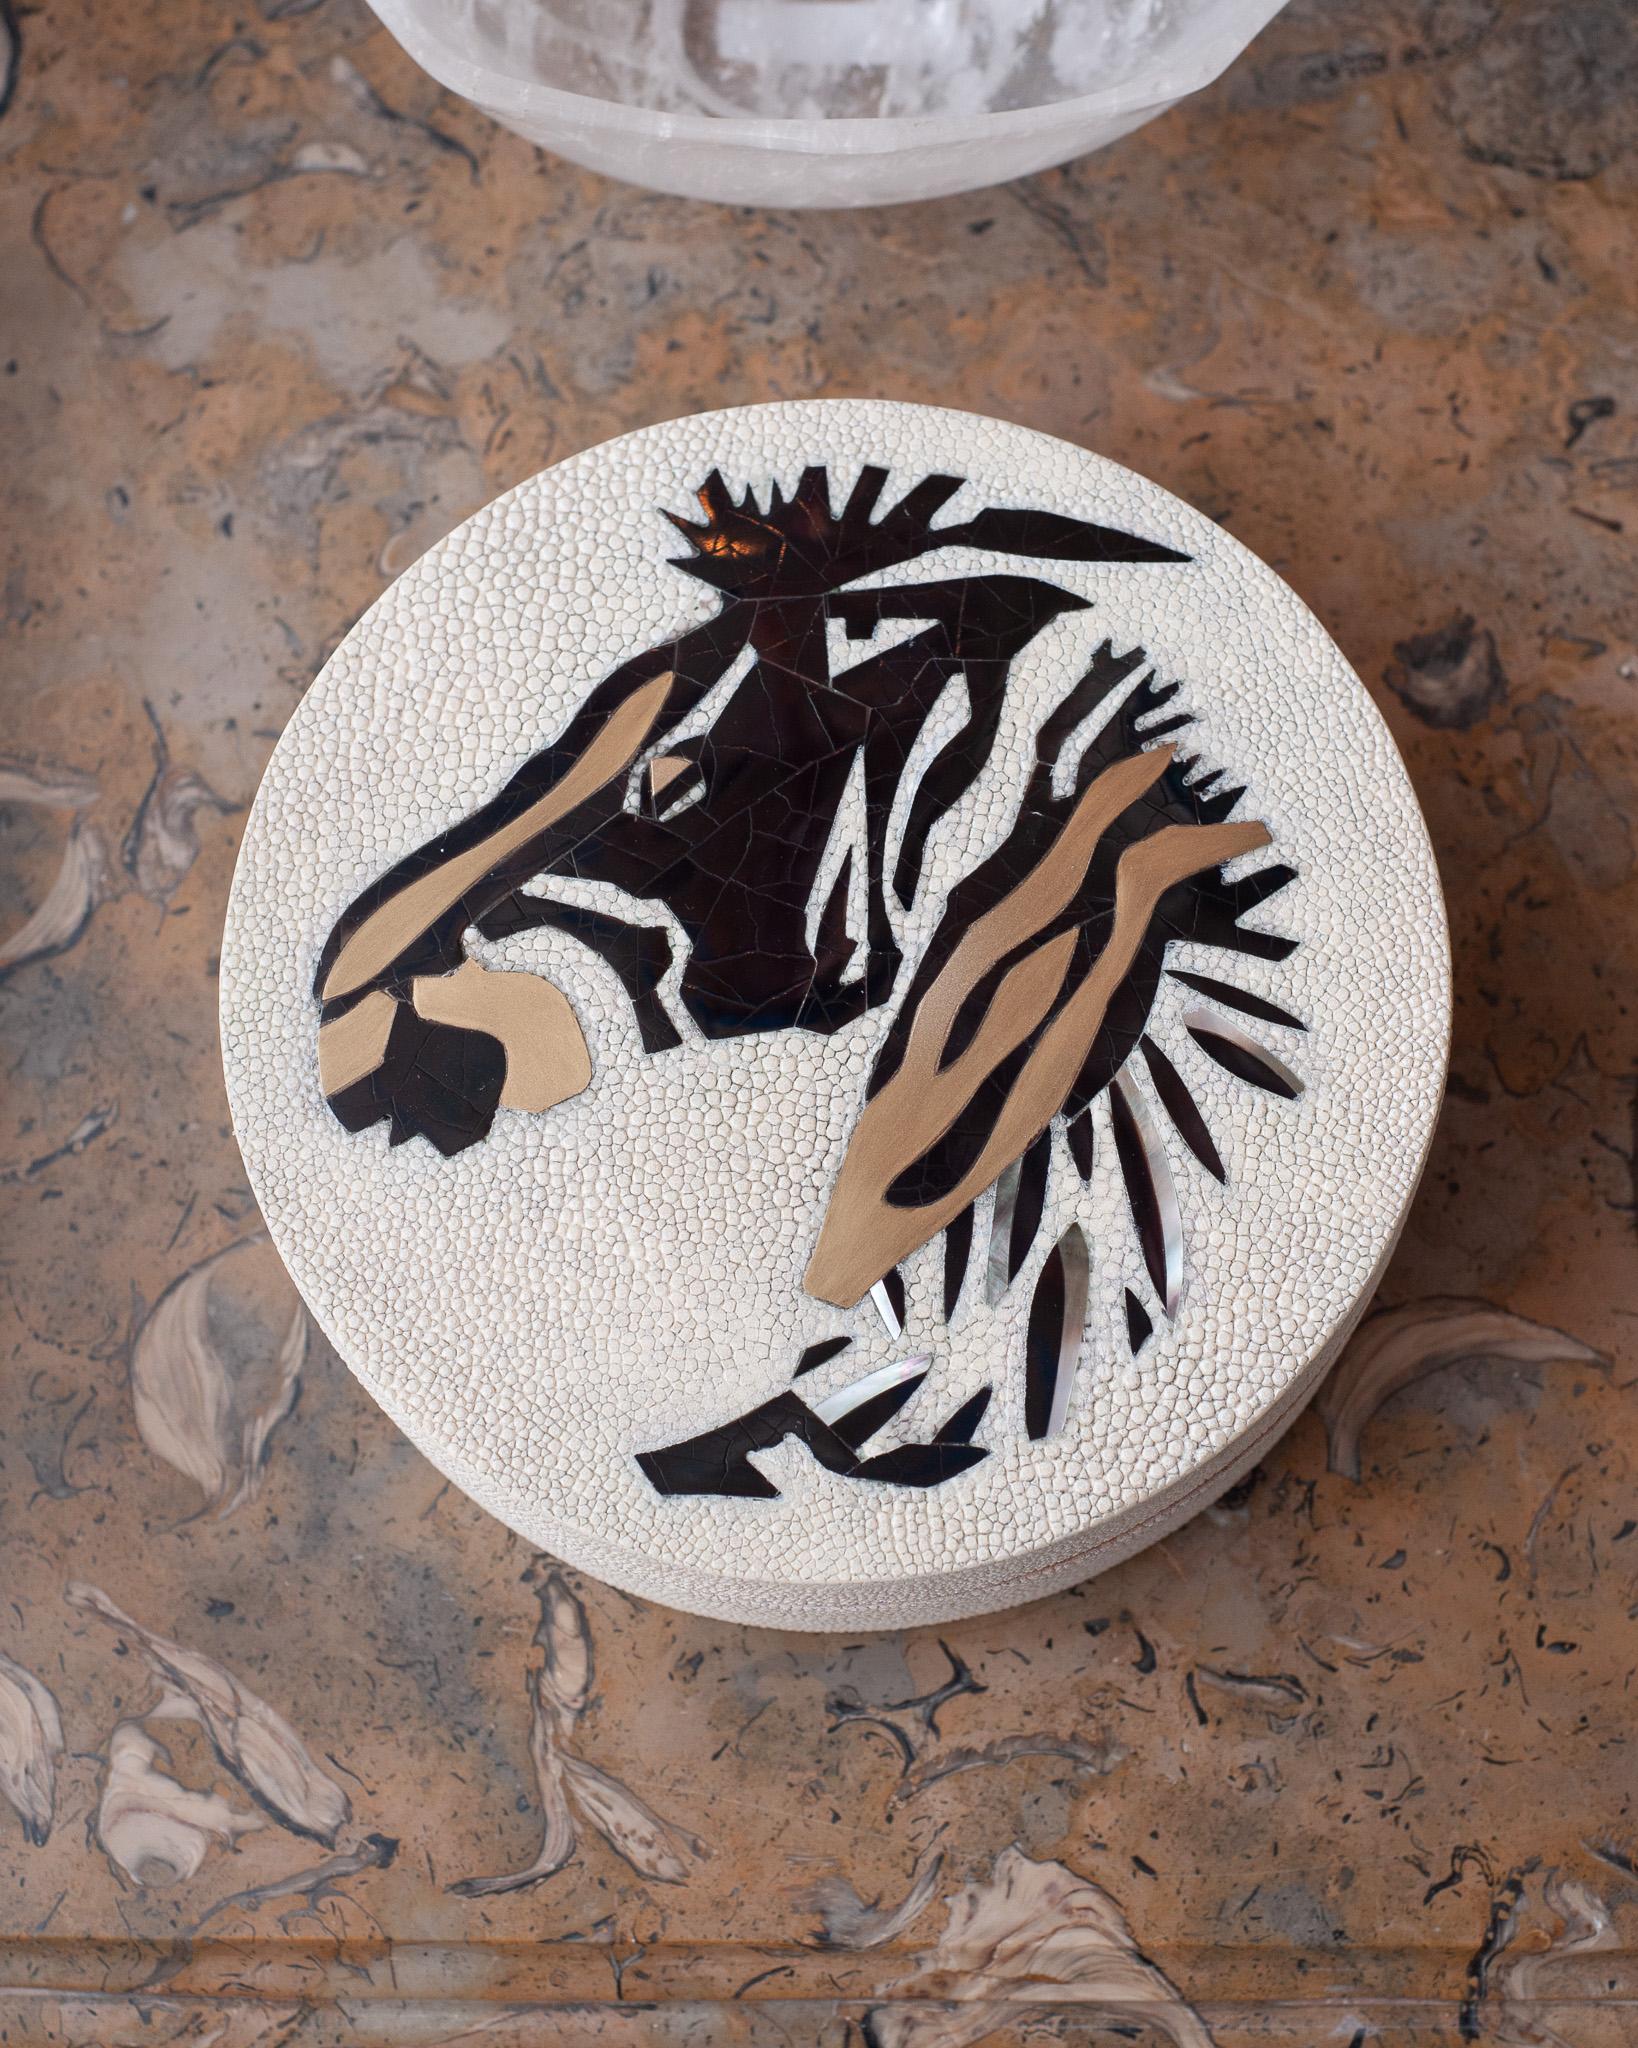 In stock now - A gorgeous Kifu Paris decorative box in creme shagreen over a base of walnut, with brass, creme shagreen, black penshell, and white mother of pearl inlay lid. Expertly crafted in a Zebra motif, this decorative box is a perfect